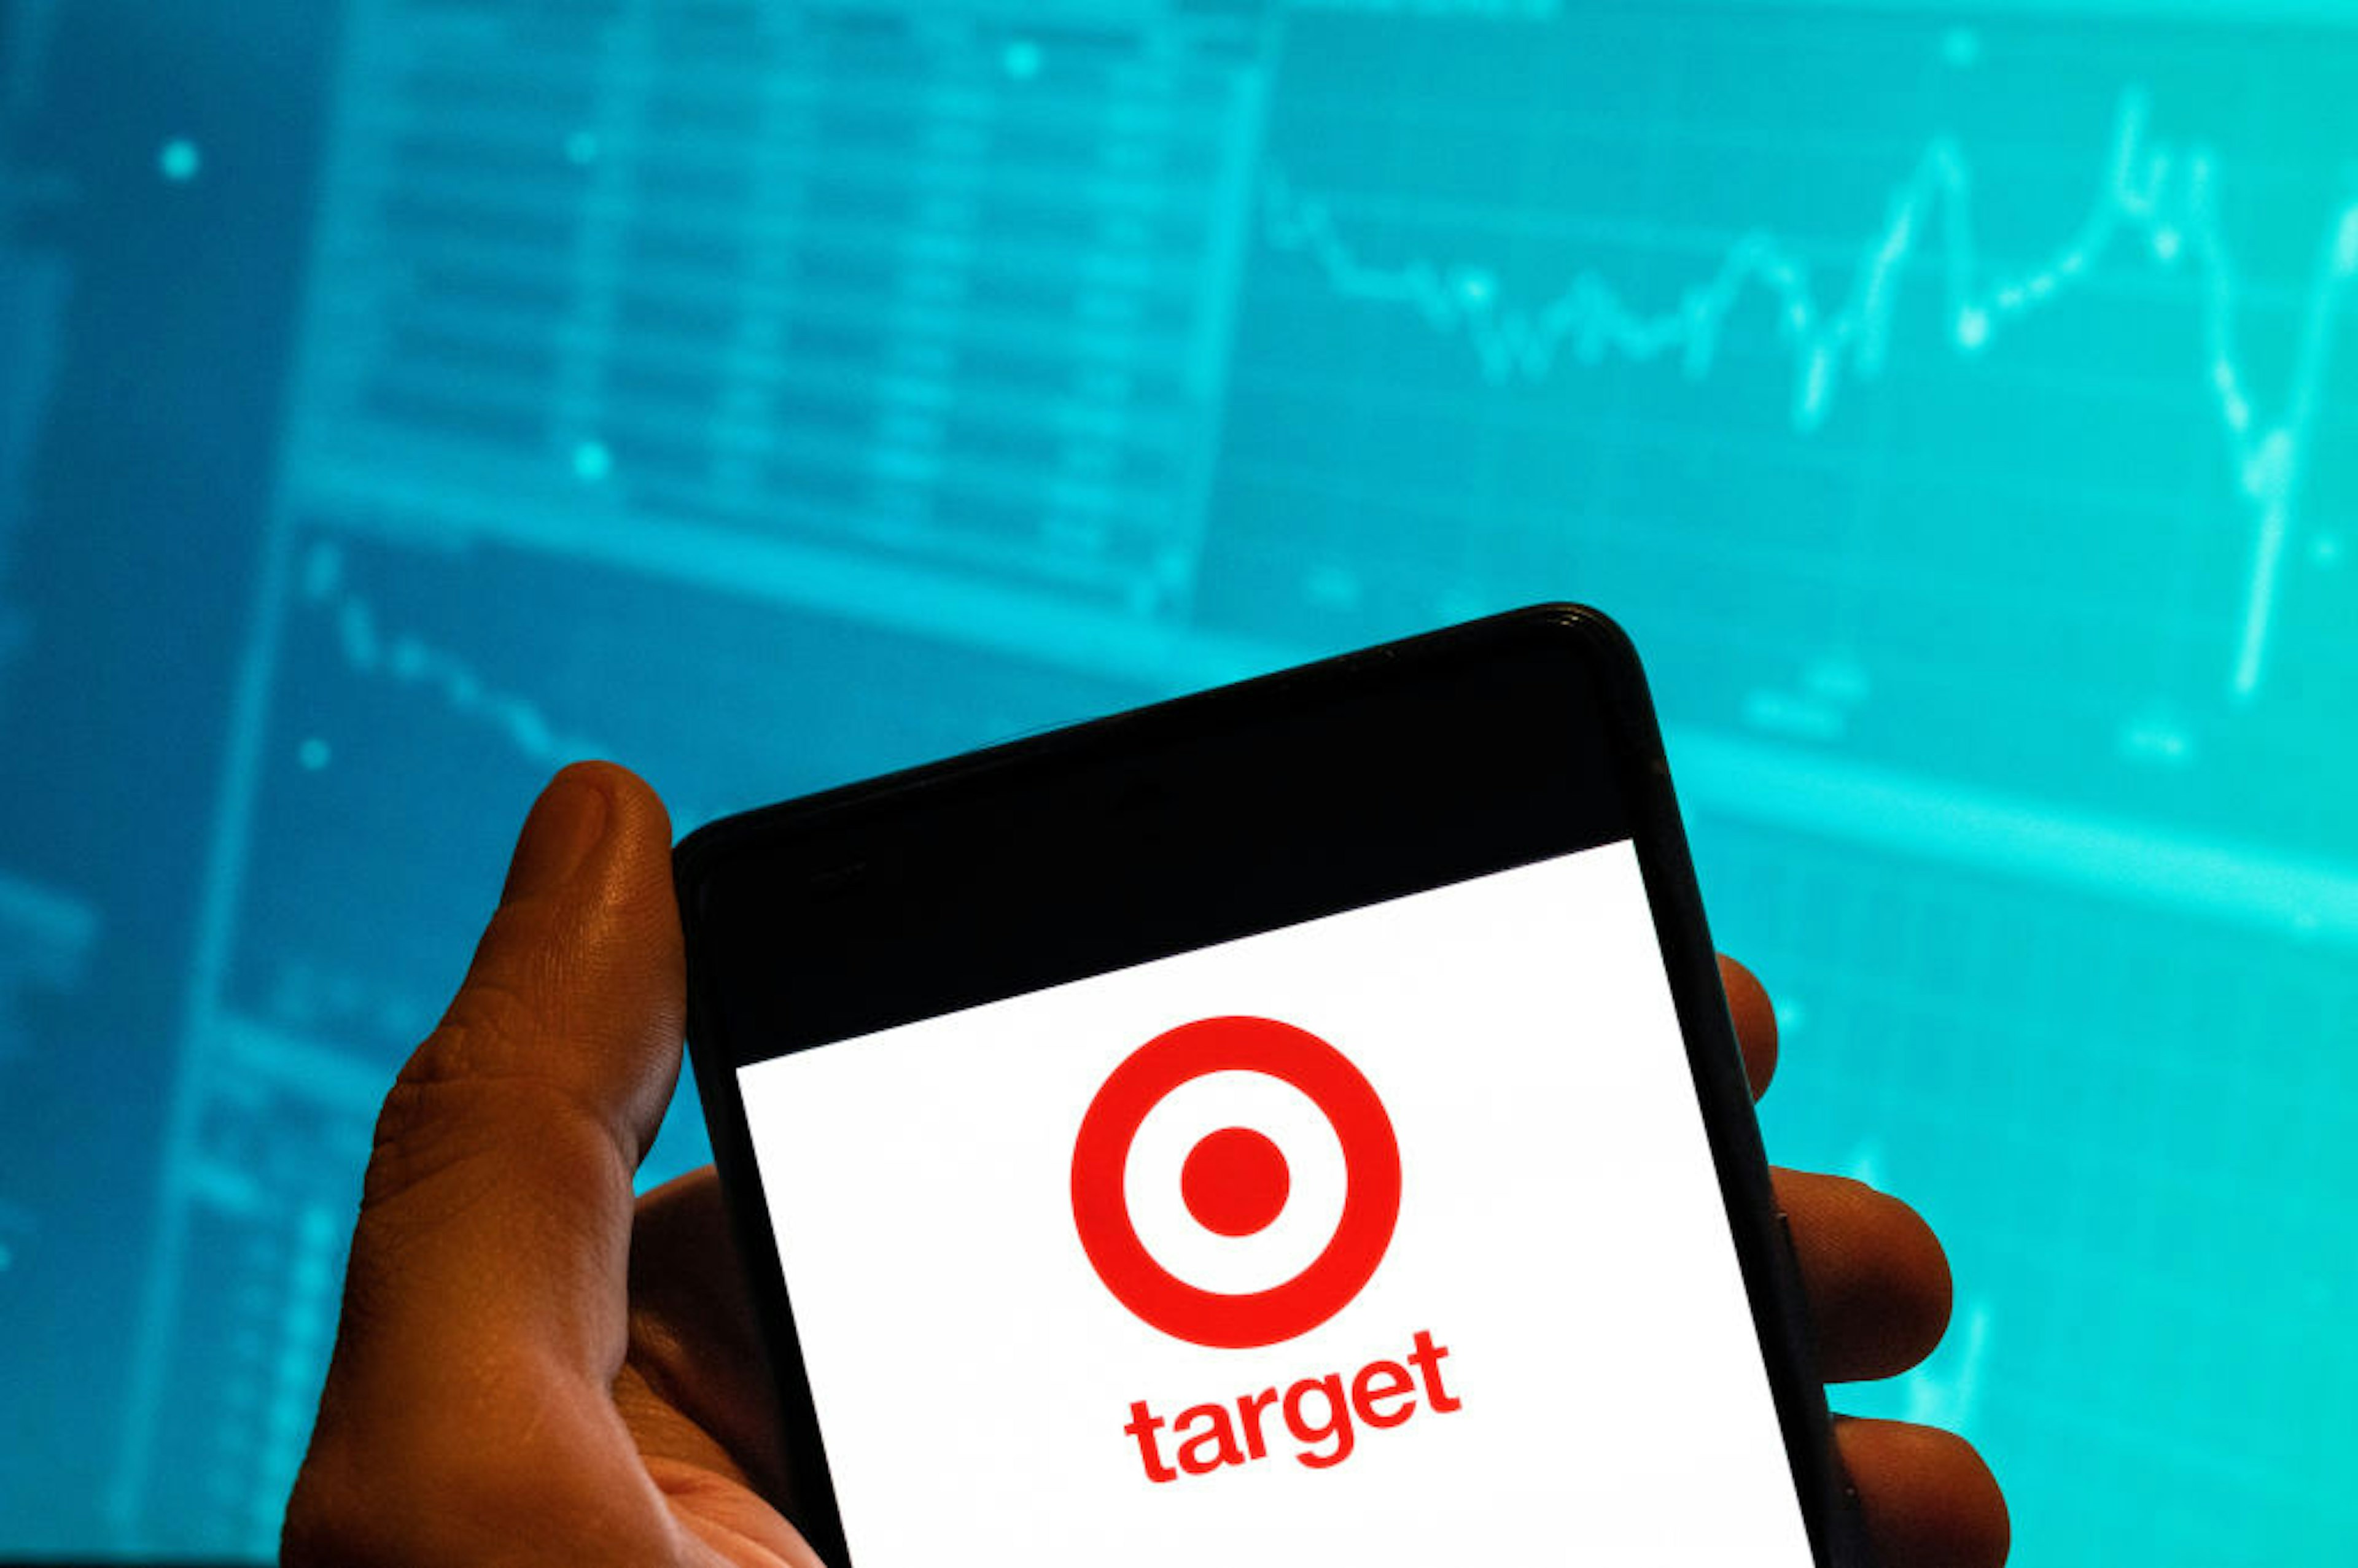 CHINA - 2023/02/15: In this photo illustration, the American retail corporation Target logo is seen displayed on a smartphone with an economic stock exchange index graph in the background. (Photo Illustration by Budrul Chukrut/SOPA Images/LightRocket via Getty Images)